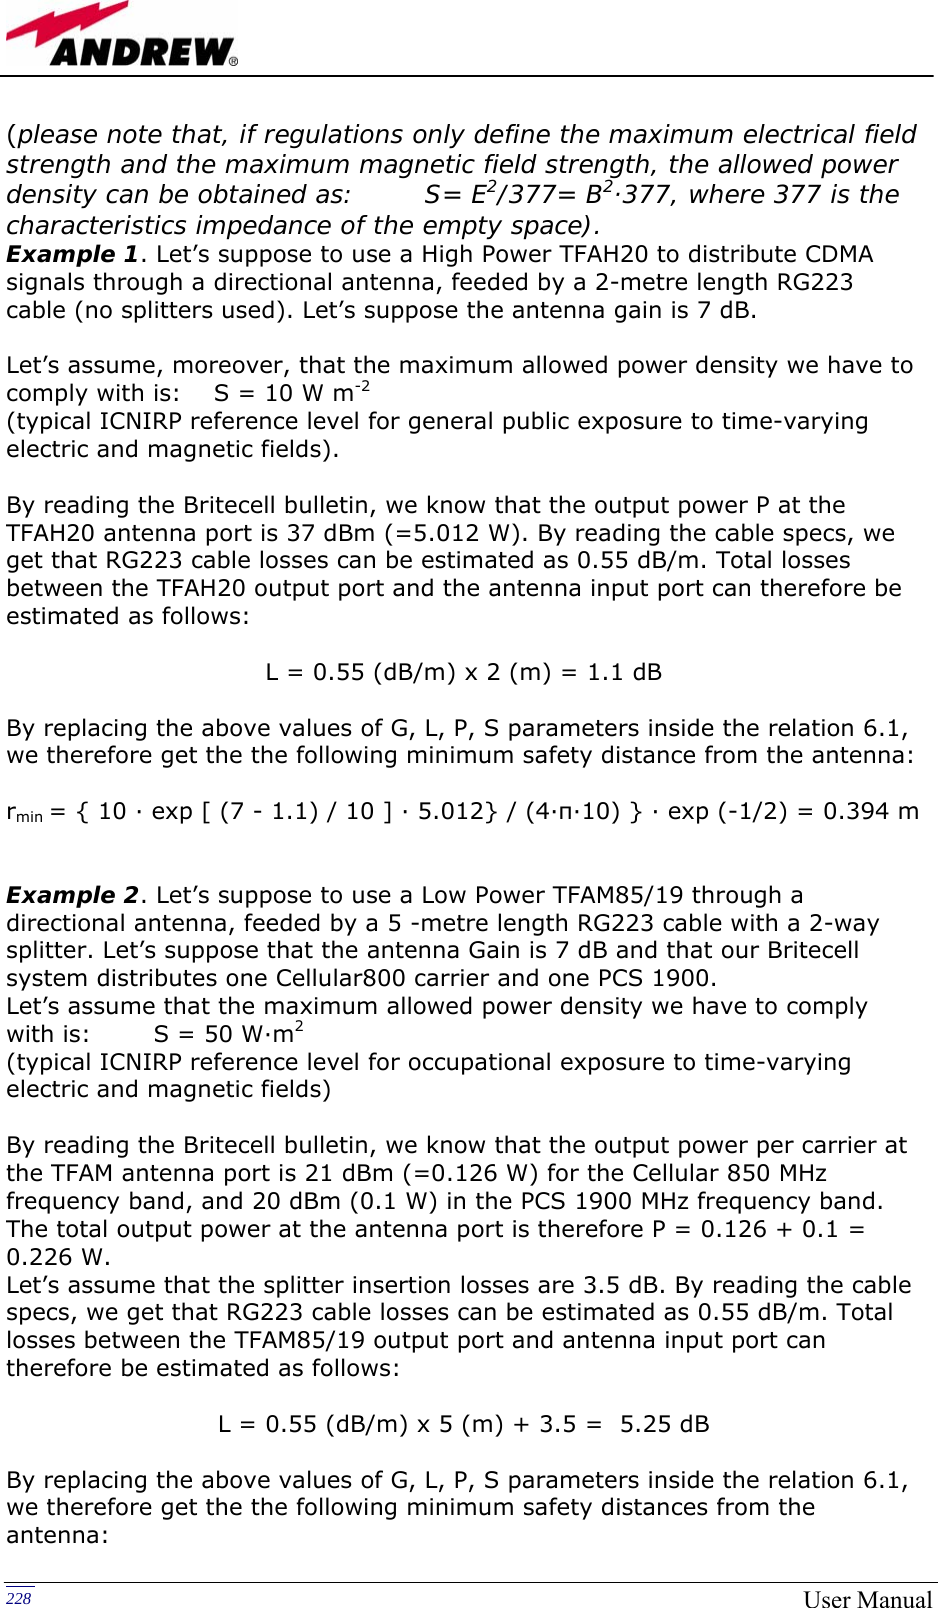   228  User Manual(please note that, if regulations only define the maximum electrical field strength and the maximum magnetic field strength, the allowed power density can be obtained as:        S= E2/377= B2·377, where 377 is the characteristics impedance of the empty space). Example 1. Let’s suppose to use a High Power TFAH20 to distribute CDMA signals through a directional antenna, feeded by a 2-metre length RG223 cable (no splitters used). Let’s suppose the antenna gain is 7 dB.  Let’s assume, moreover, that the maximum allowed power density we have to comply with is:    S = 10 W m-2 (typical ICNIRP reference level for general public exposure to time-varying electric and magnetic fields).  By reading the Britecell bulletin, we know that the output power P at the TFAH20 antenna port is 37 dBm (=5.012 W). By reading the cable specs, we get that RG223 cable losses can be estimated as 0.55 dB/m. Total losses between the TFAH20 output port and the antenna input port can therefore be estimated as follows:  L = 0.55 (dB/m) x 2 (m) = 1.1 dB  By replacing the above values of G, L, P, S parameters inside the relation 6.1, we therefore get the the following minimum safety distance from the antenna:  rmin = { 10 · exp [ (7 - 1.1) / 10 ] · 5.012} / (4·π·10) } · exp (-1/2) = 0.394 m    Example 2. Let’s suppose to use a Low Power TFAM85/19 through a directional antenna, feeded by a 5 -metre length RG223 cable with a 2-way splitter. Let’s suppose that the antenna Gain is 7 dB and that our Britecell system distributes one Cellular800 carrier and one PCS 1900. Let’s assume that the maximum allowed power density we have to comply with is:  S = 50 W·m2 (typical ICNIRP reference level for occupational exposure to time-varying electric and magnetic fields)  By reading the Britecell bulletin, we know that the output power per carrier at the TFAM antenna port is 21 dBm (=0.126 W) for the Cellular 850 MHz frequency band, and 20 dBm (0.1 W) in the PCS 1900 MHz frequency band. The total output power at the antenna port is therefore P = 0.126 + 0.1 = 0.226 W. Let’s assume that the splitter insertion losses are 3.5 dB. By reading the cable specs, we get that RG223 cable losses can be estimated as 0.55 dB/m. Total losses between the TFAM85/19 output port and antenna input port can therefore be estimated as follows:  L = 0.55 (dB/m) x 5 (m) + 3.5 =  5.25 dB  By replacing the above values of G, L, P, S parameters inside the relation 6.1, we therefore get the the following minimum safety distances from the antenna: 